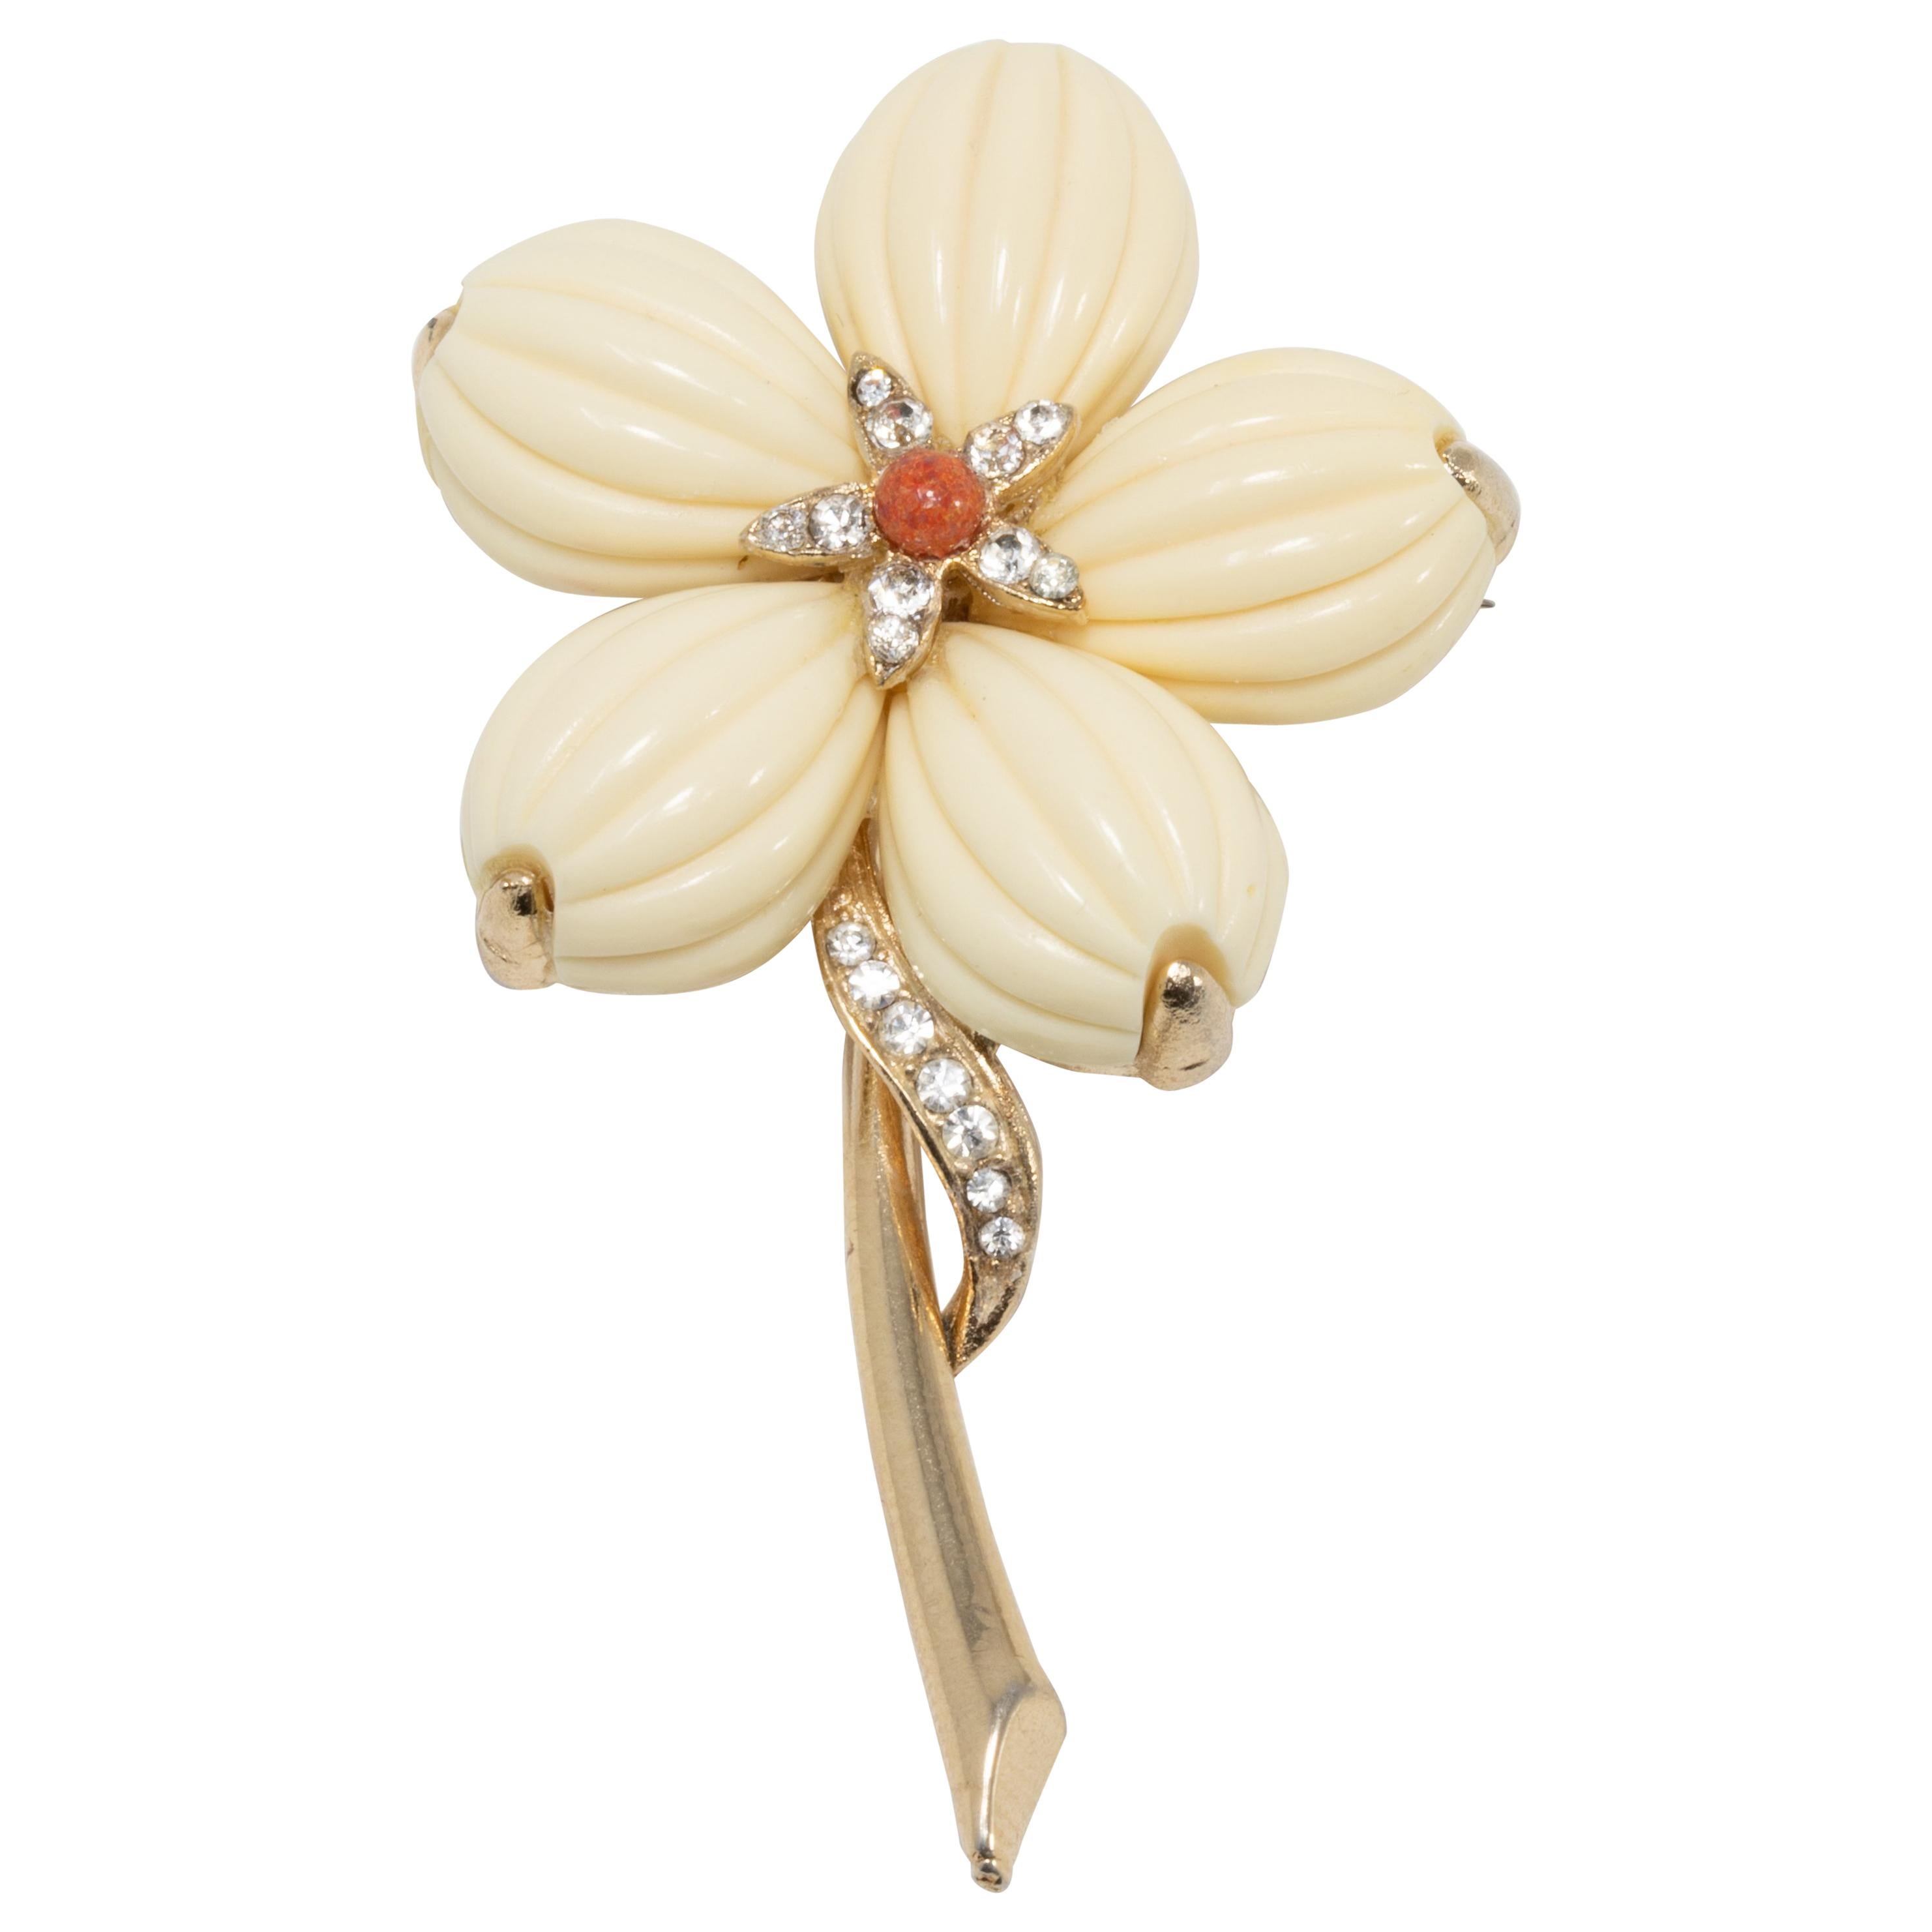 Trifari Cream Lucite Petal Flower Gold Brooch with Clear Crystals and Faux Coral